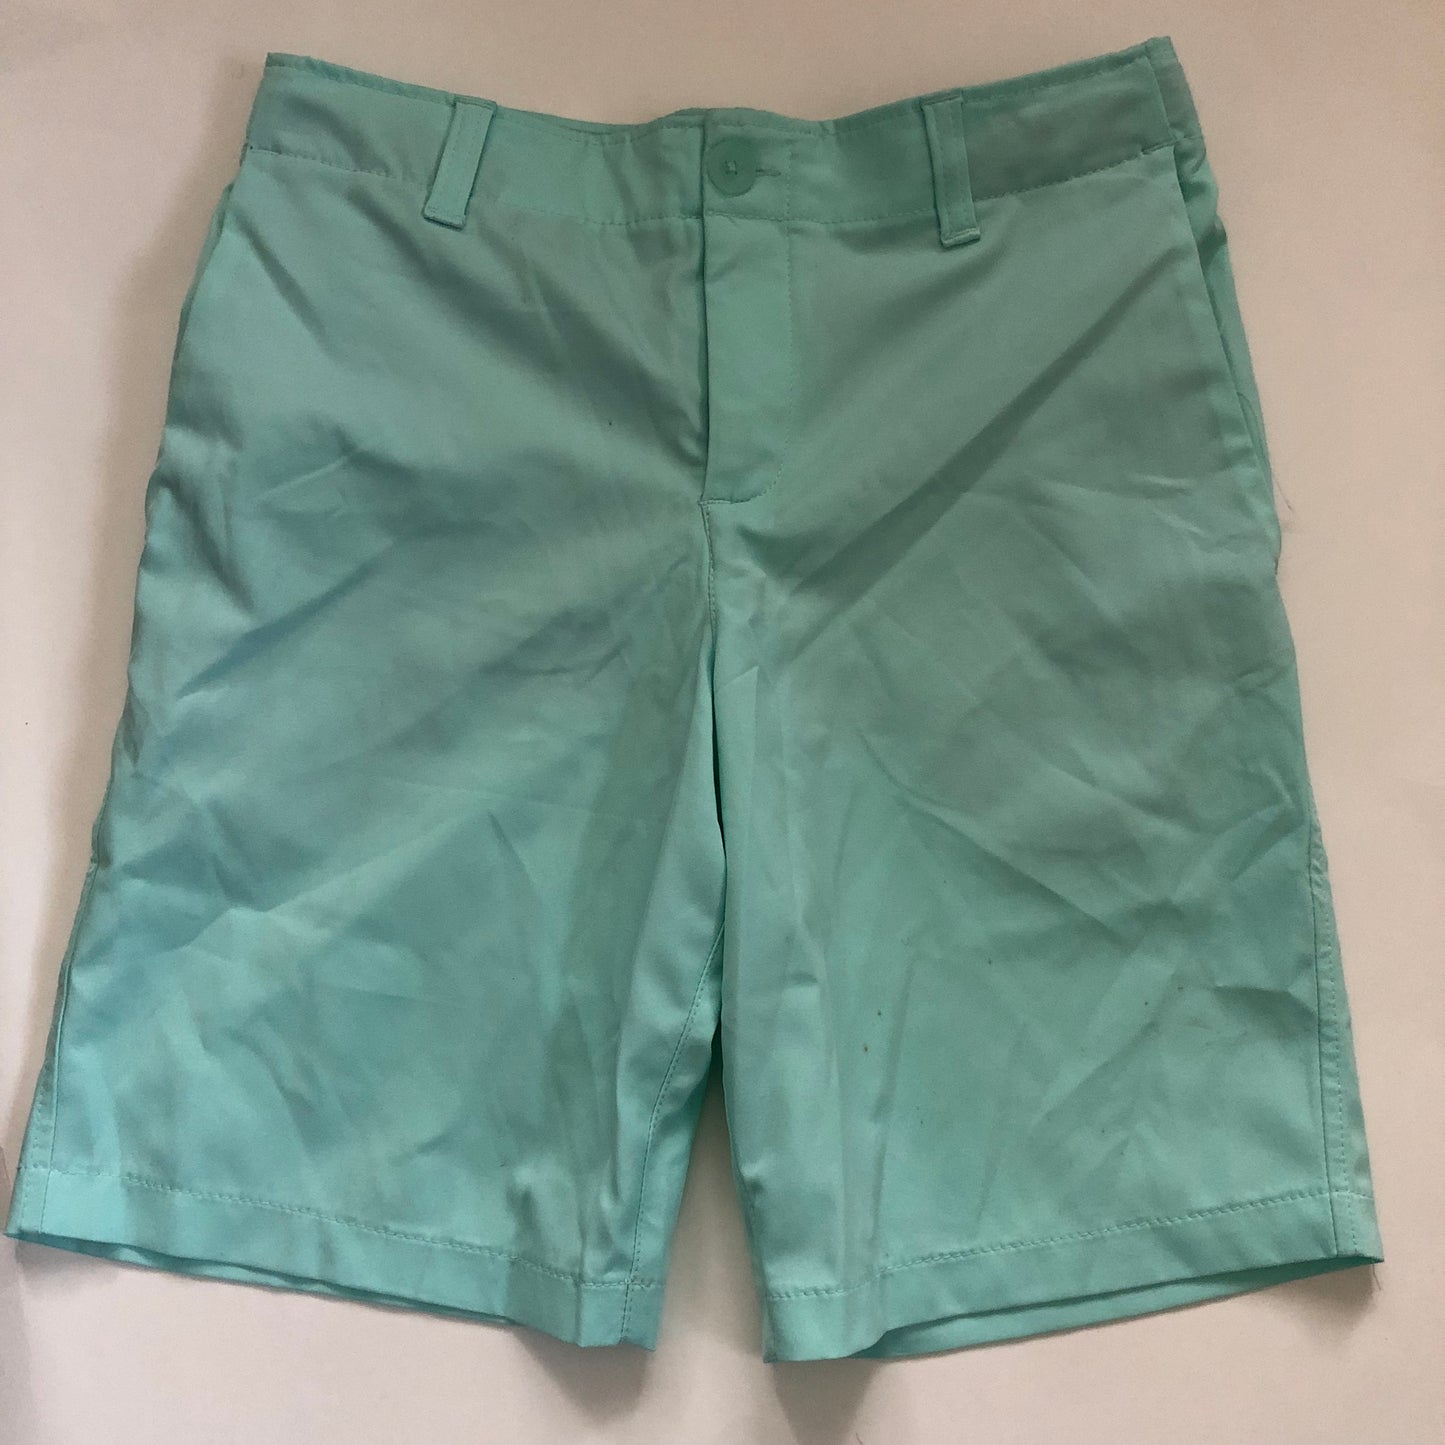 *Reduced* Size 12 Under Armour Golf Shorts- boy